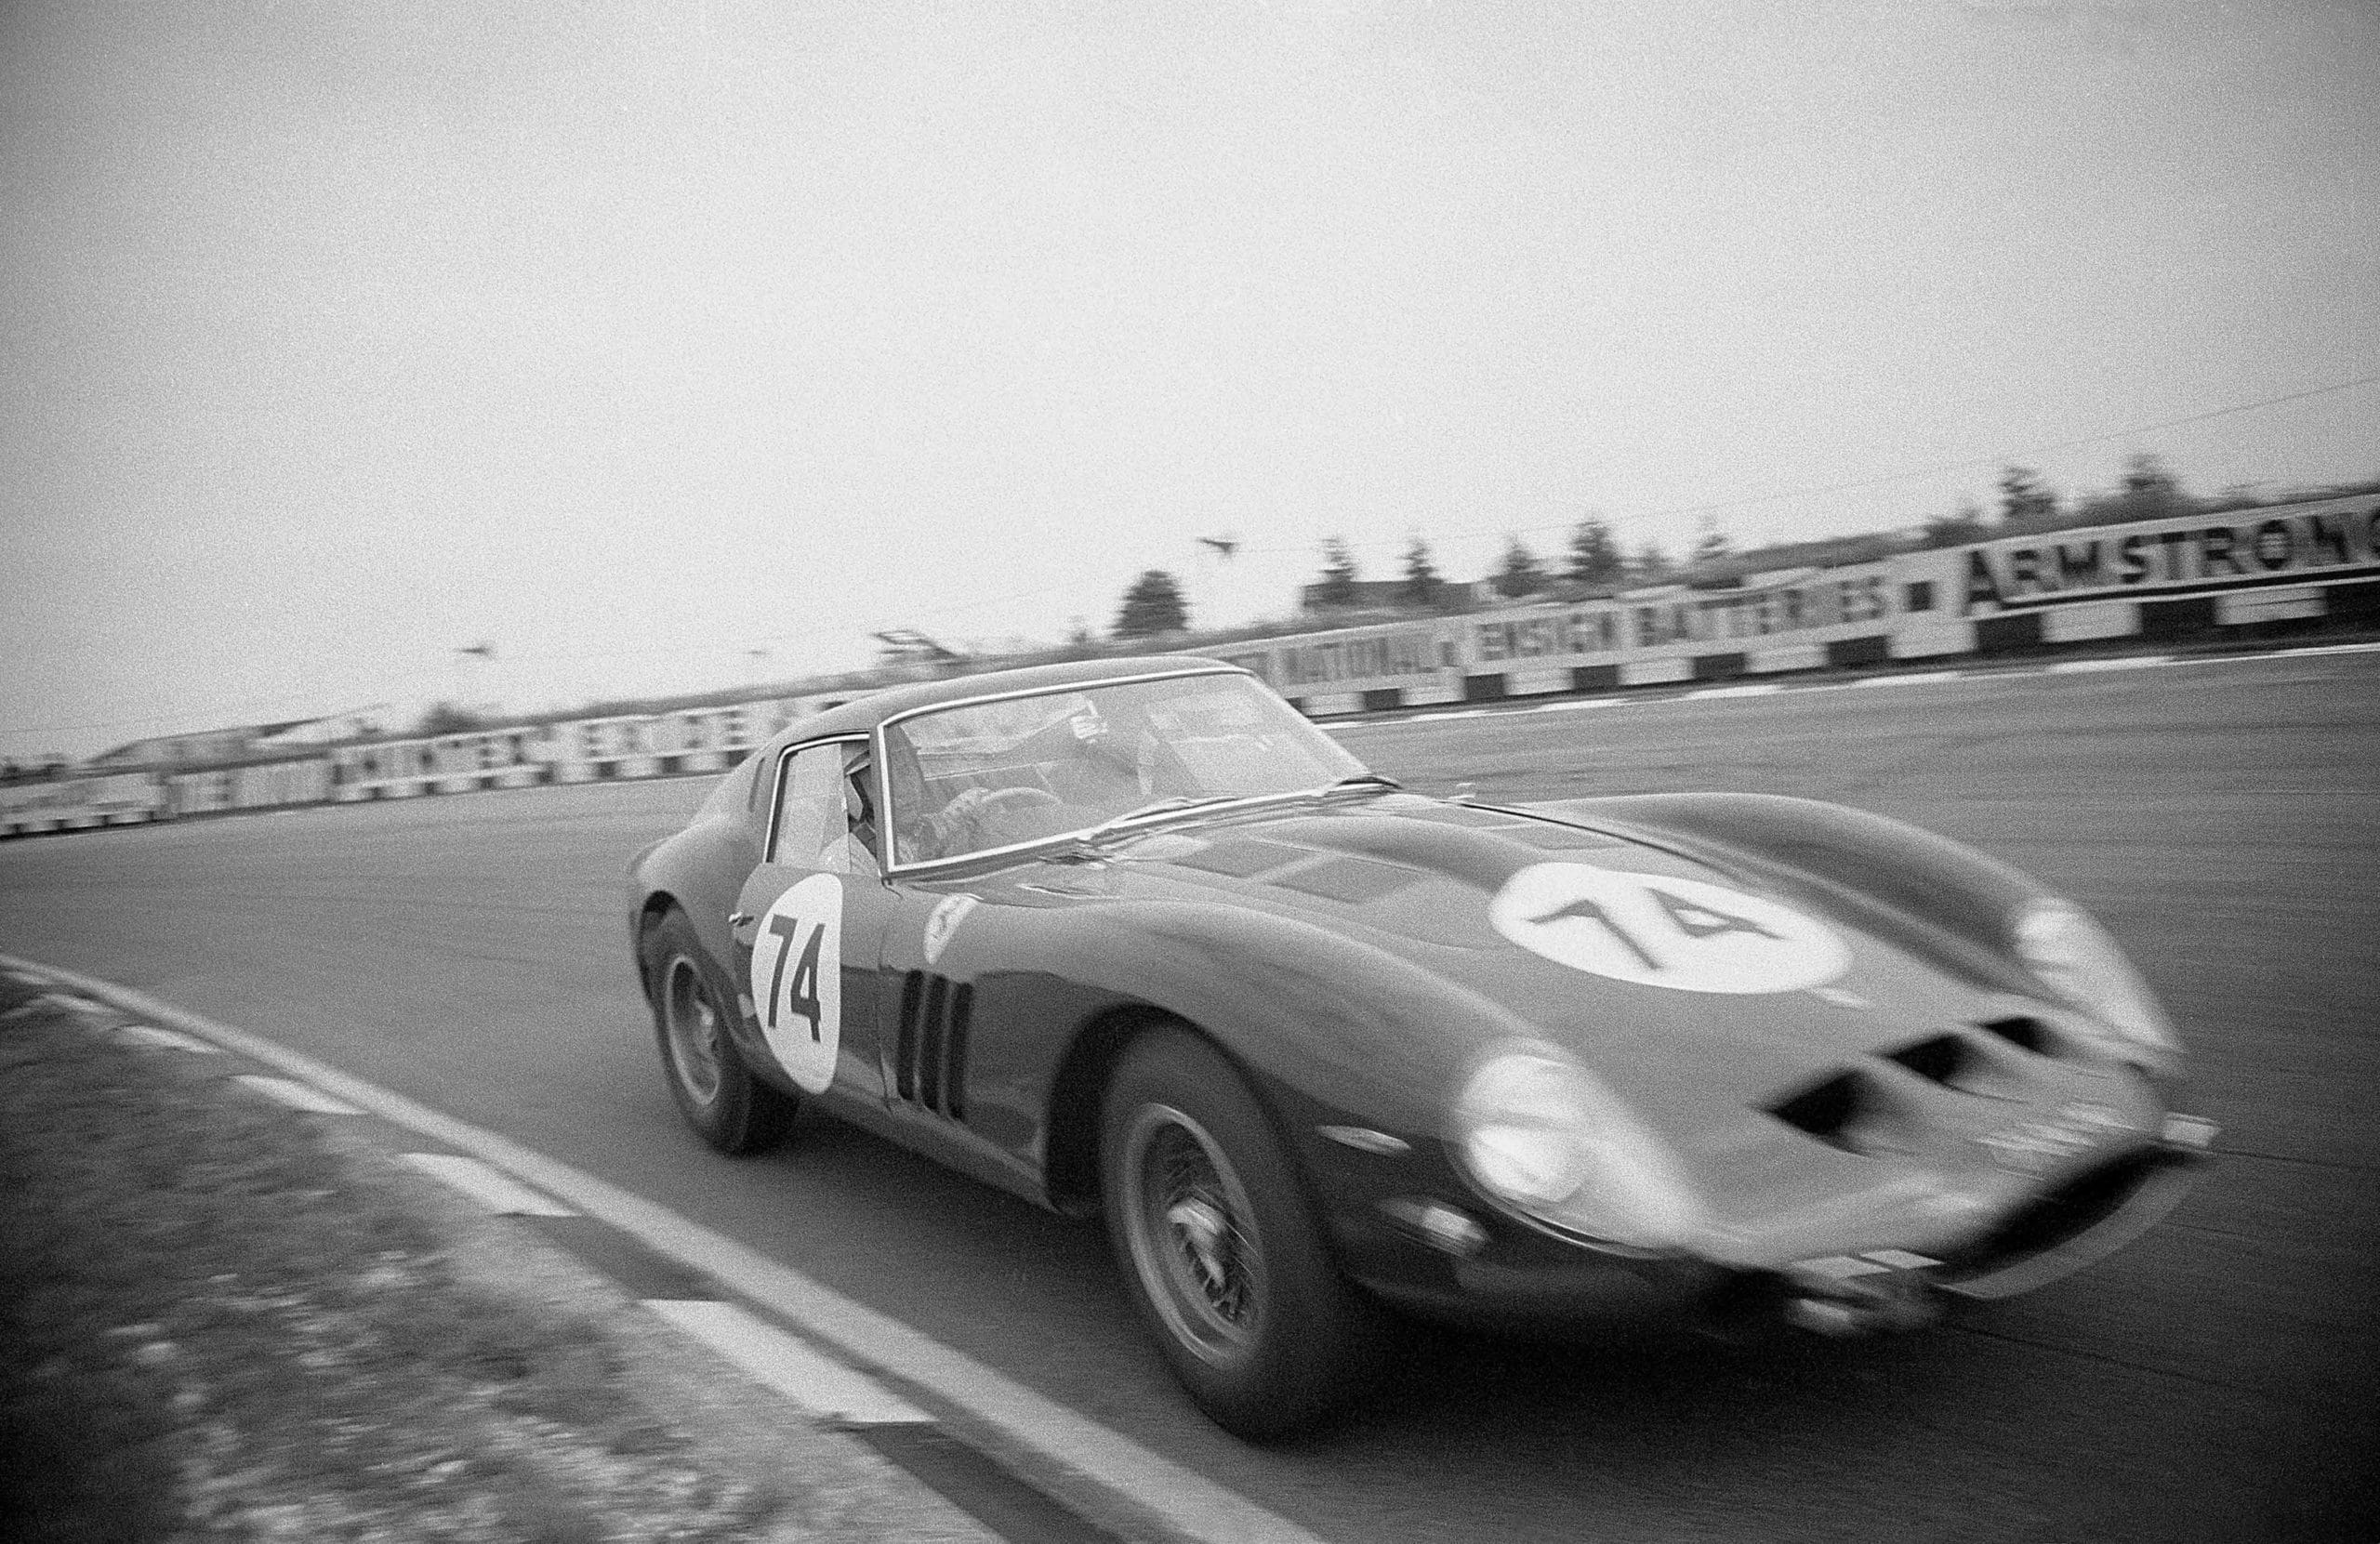 John Surtees, in the Bowmaker Ferrari 250GTO, driving through Paddock Bend during a practise session for the Peco Trophy Race, Brands Hatch, 5th August 1962. (Photo by Klemantaski Collection/Getty Images)